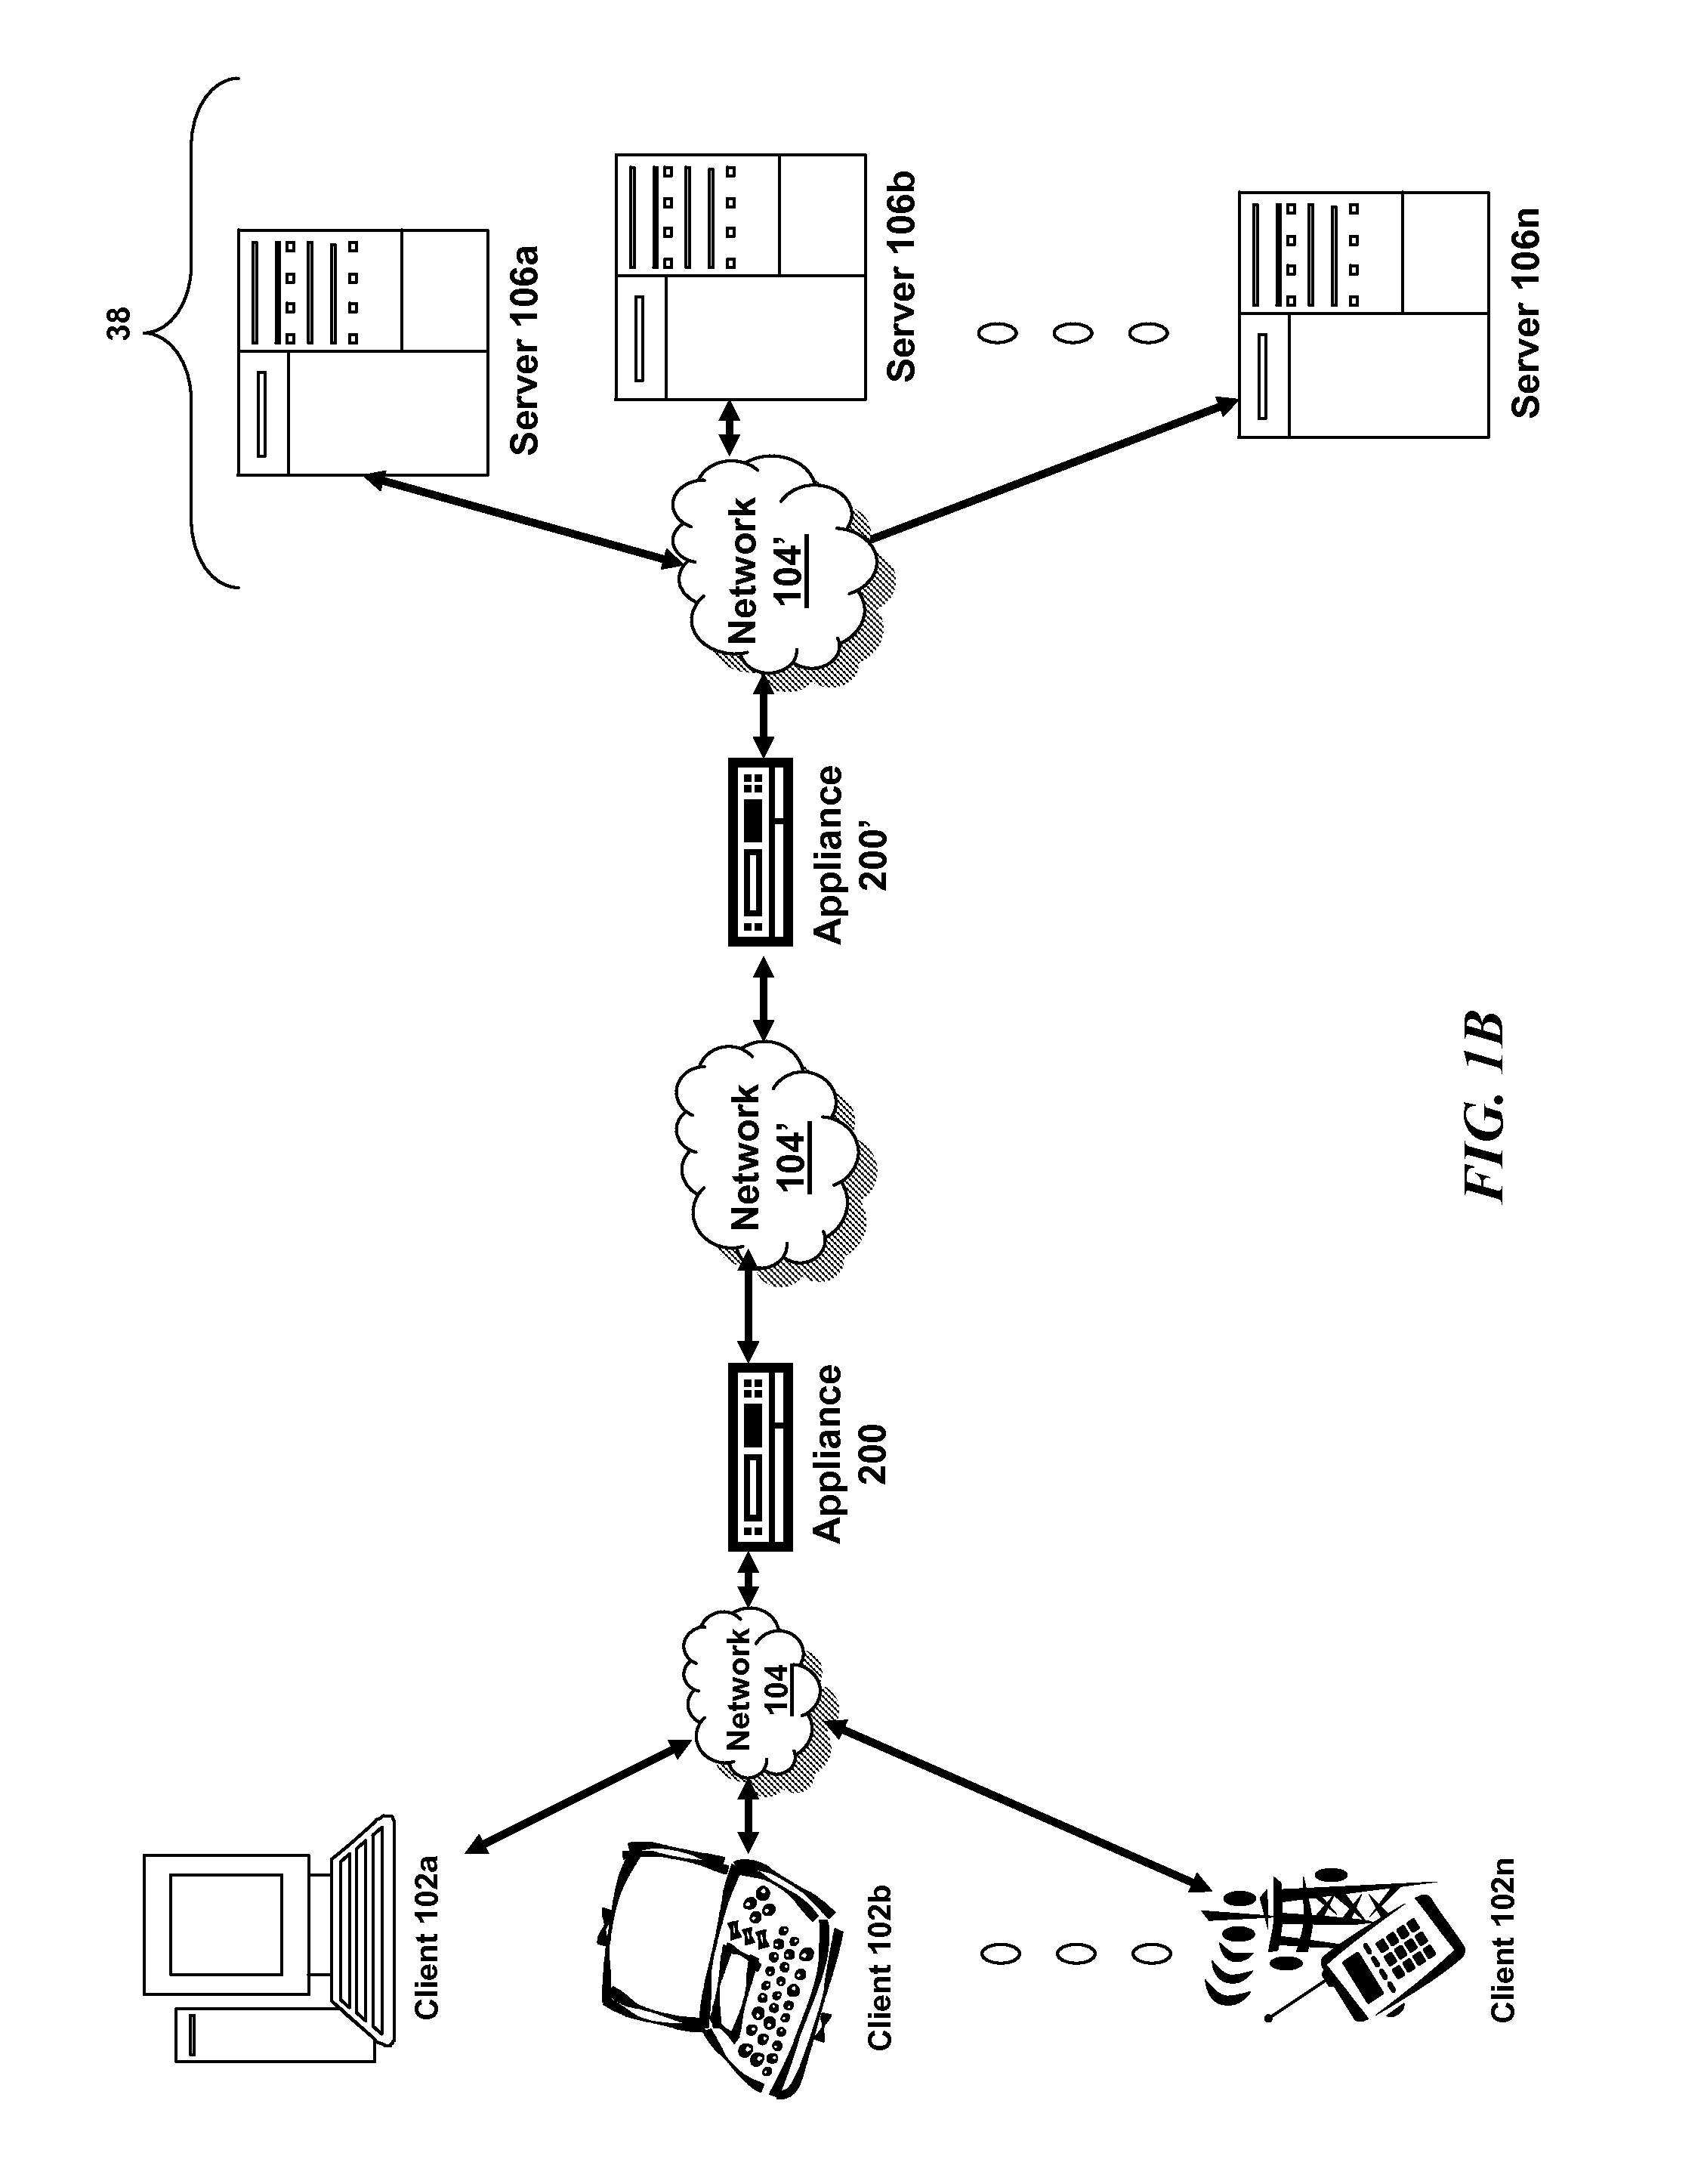 Systems and methods for gslb mep connection management across multiple core appliances